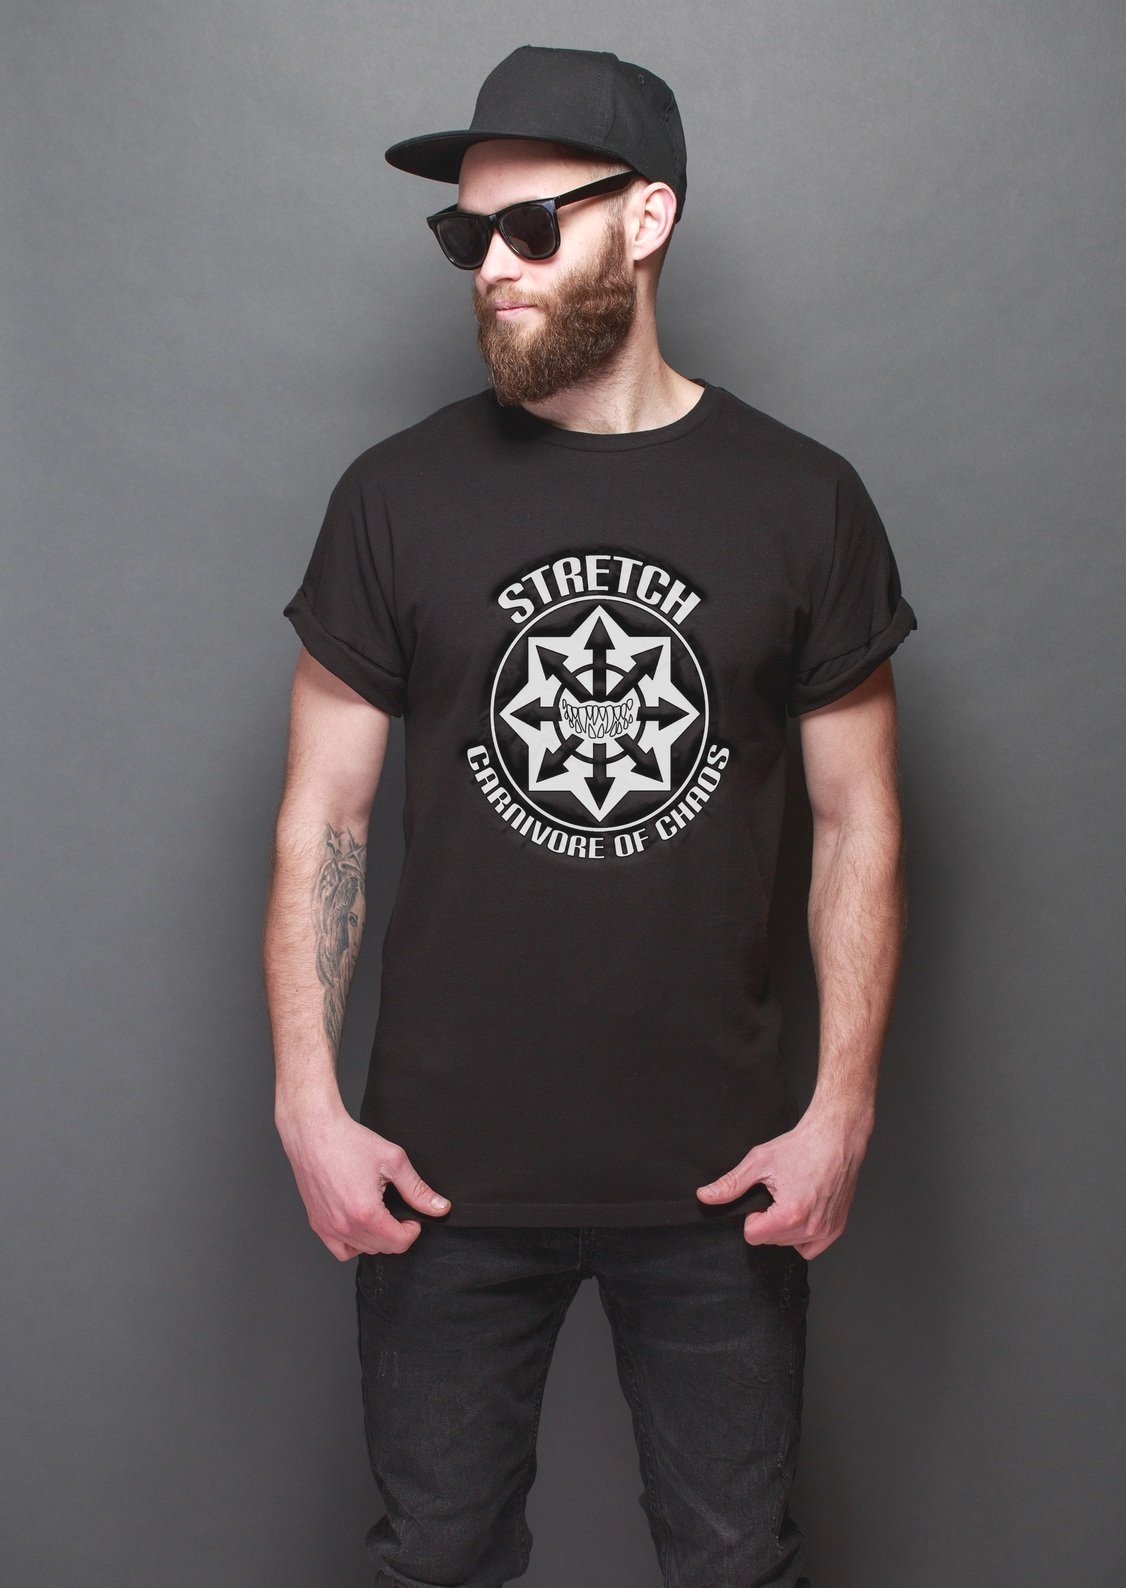 STRETCH “Wheel of Chaos” Tee